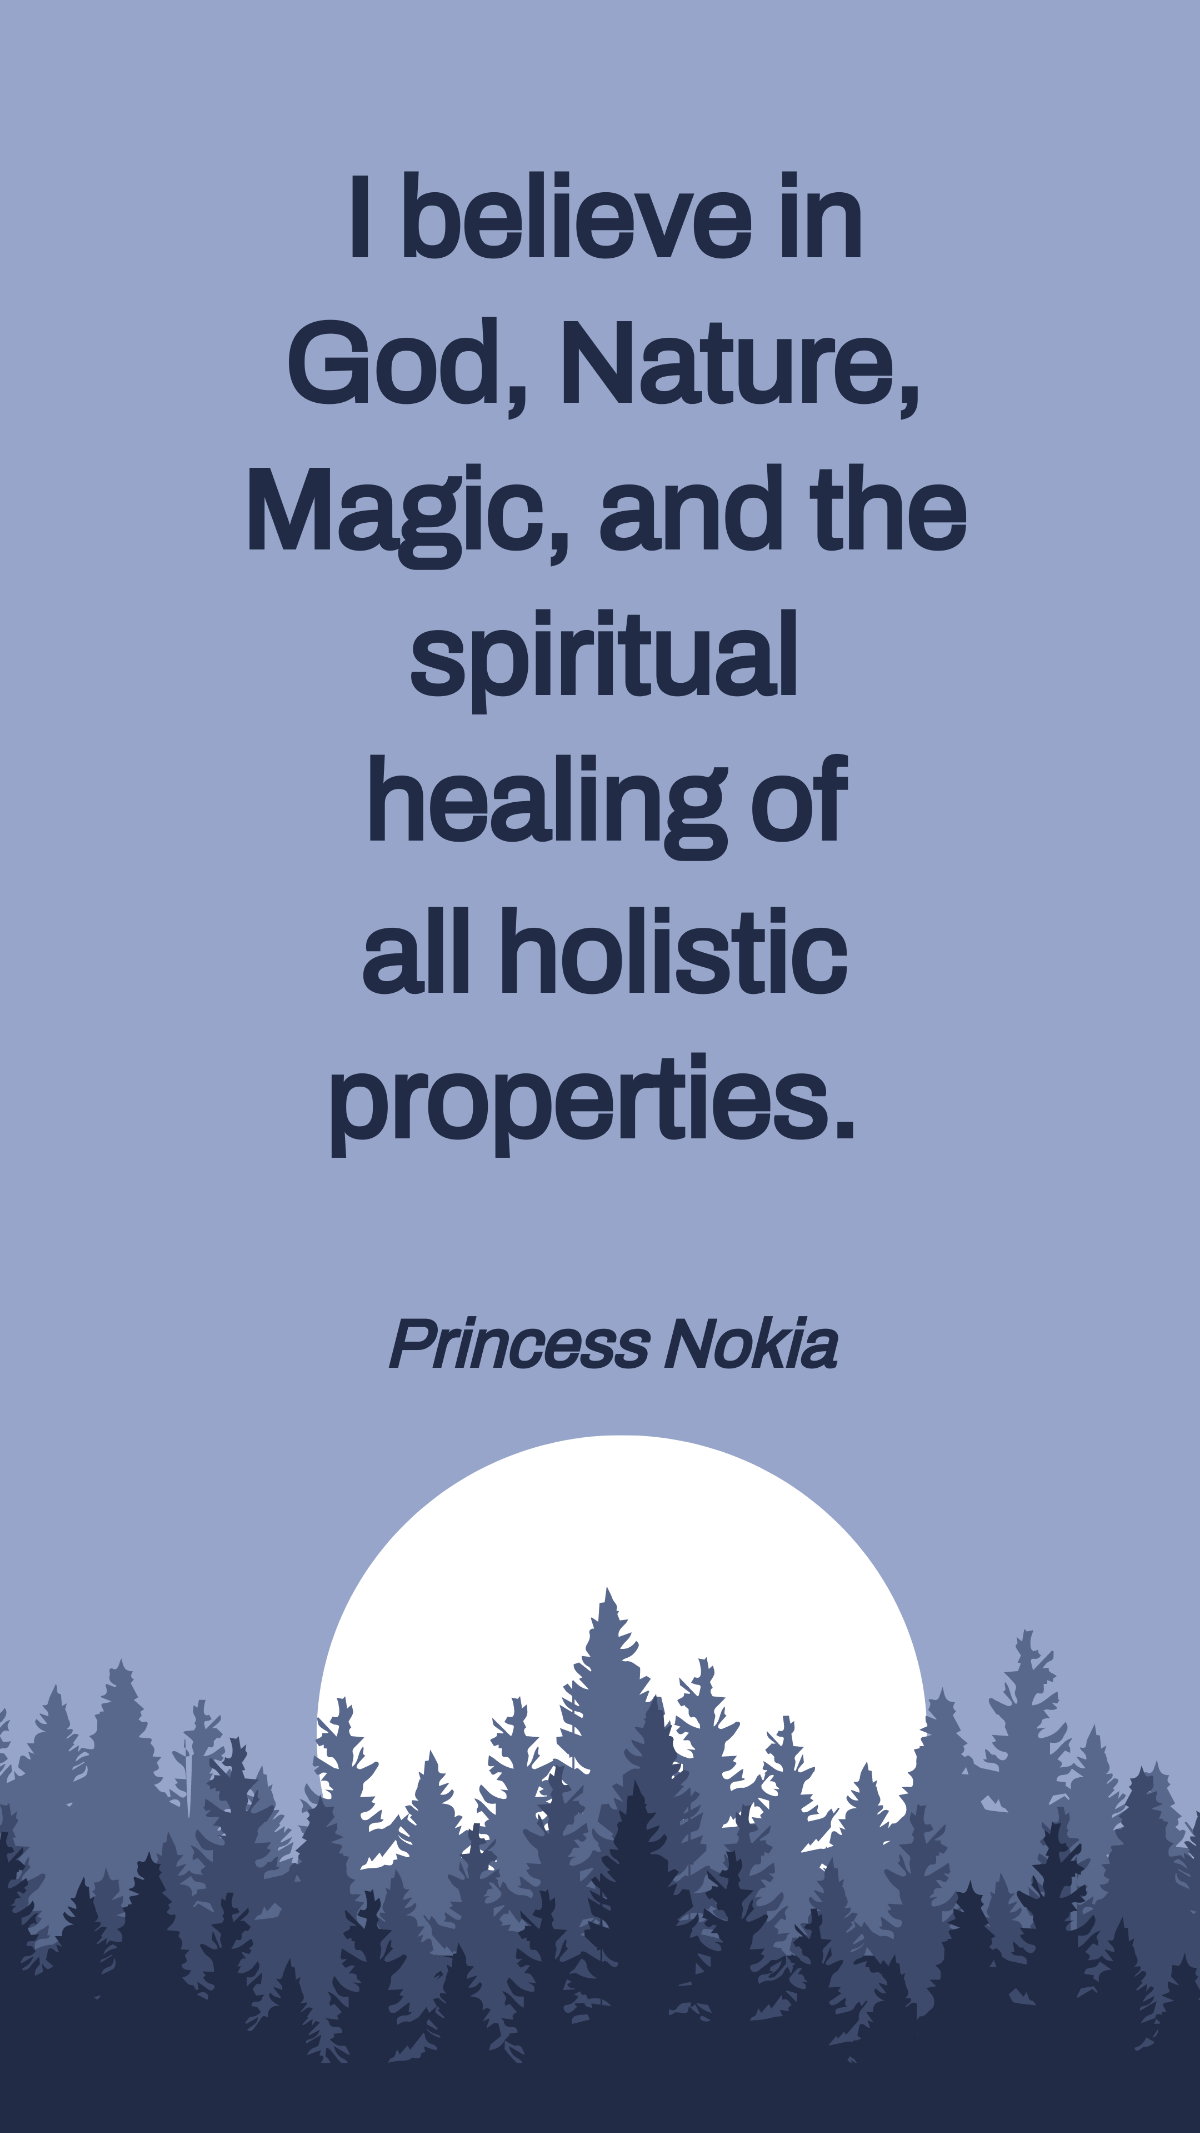 Free Princess Nokia - I believe in God, Nature, Magic, and the spiritual healing of all holistic properties. Template